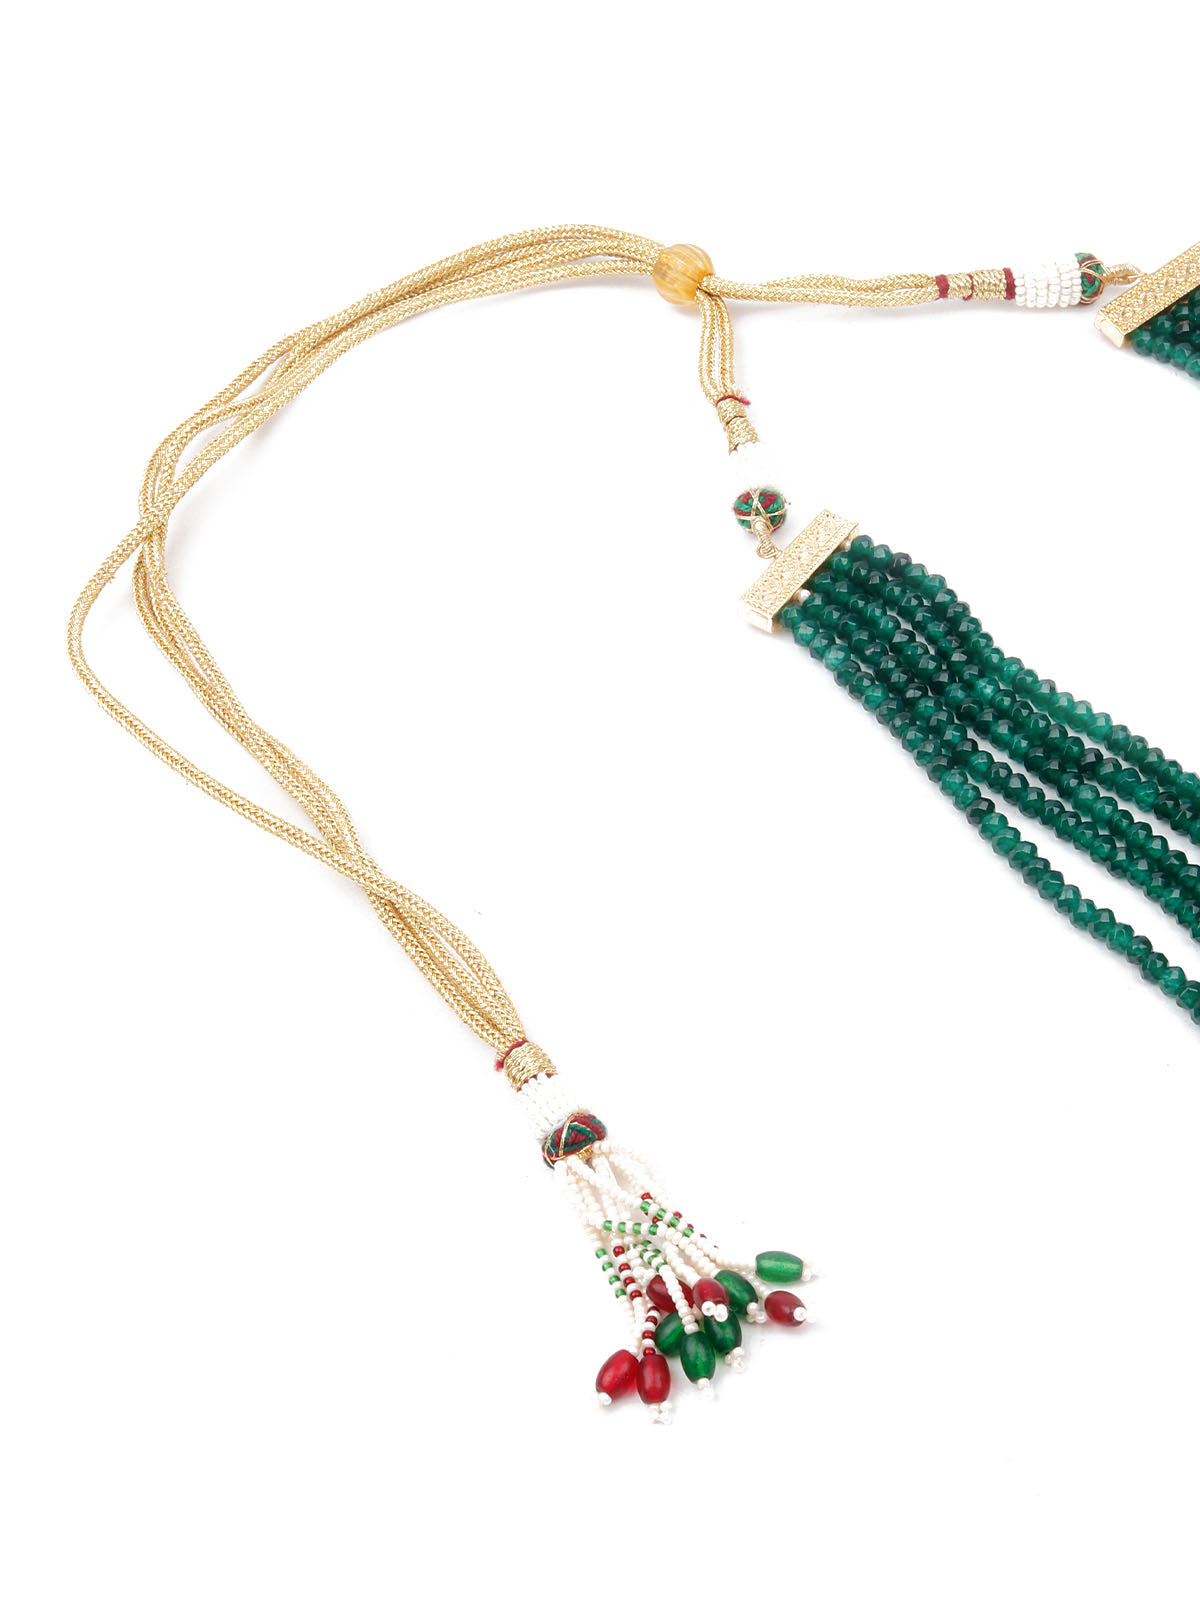 Odette Women Antique Style Bridal Green And Red Long Necklace Set